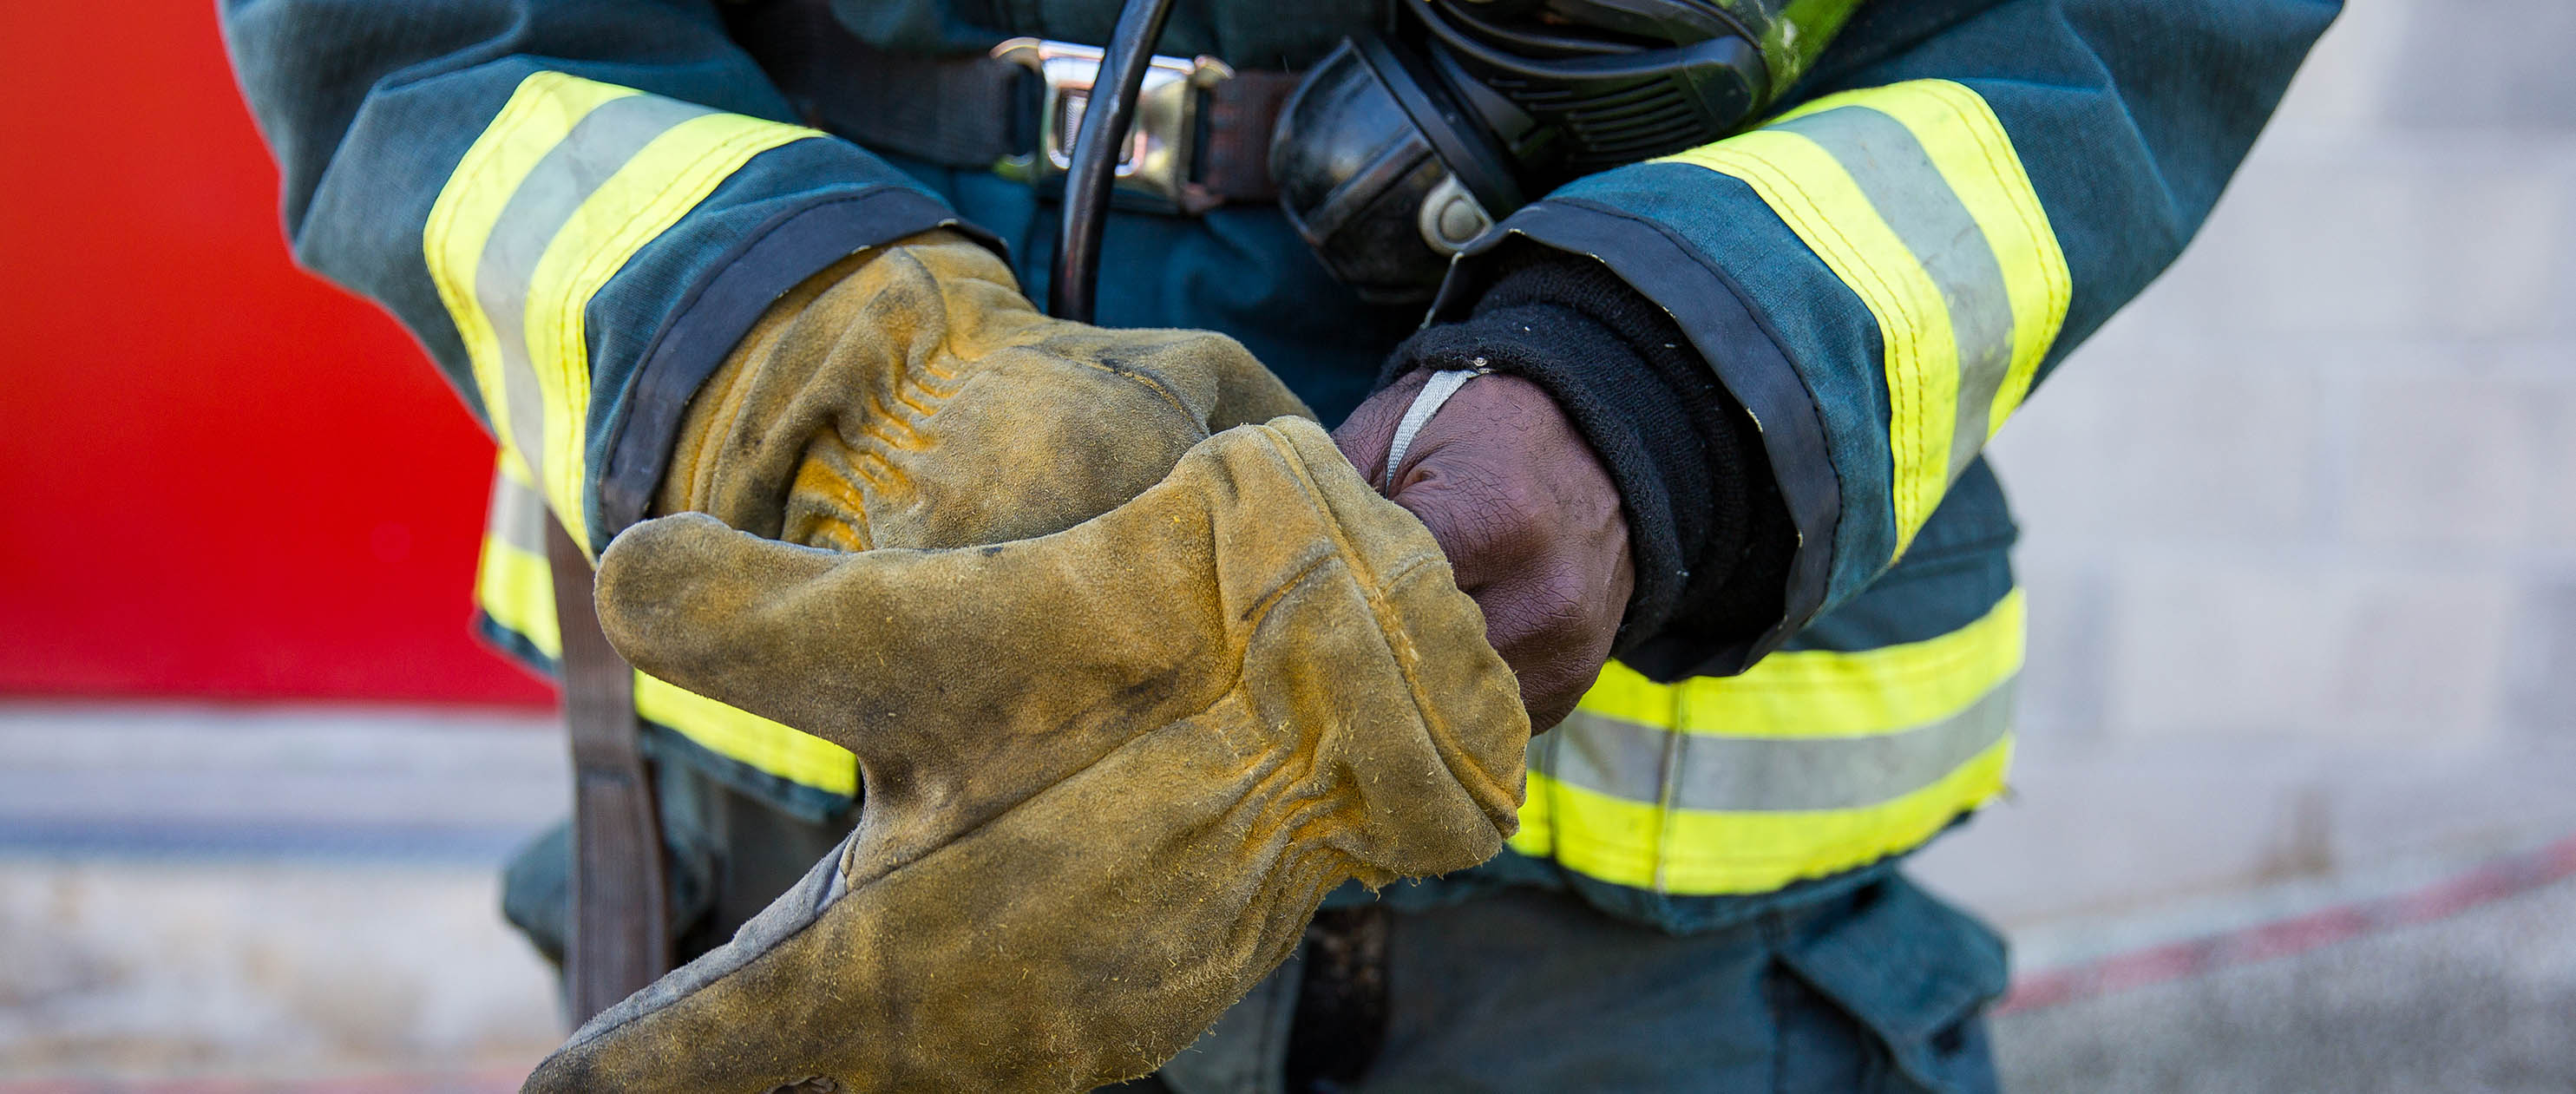 Firefighter hands with gloves